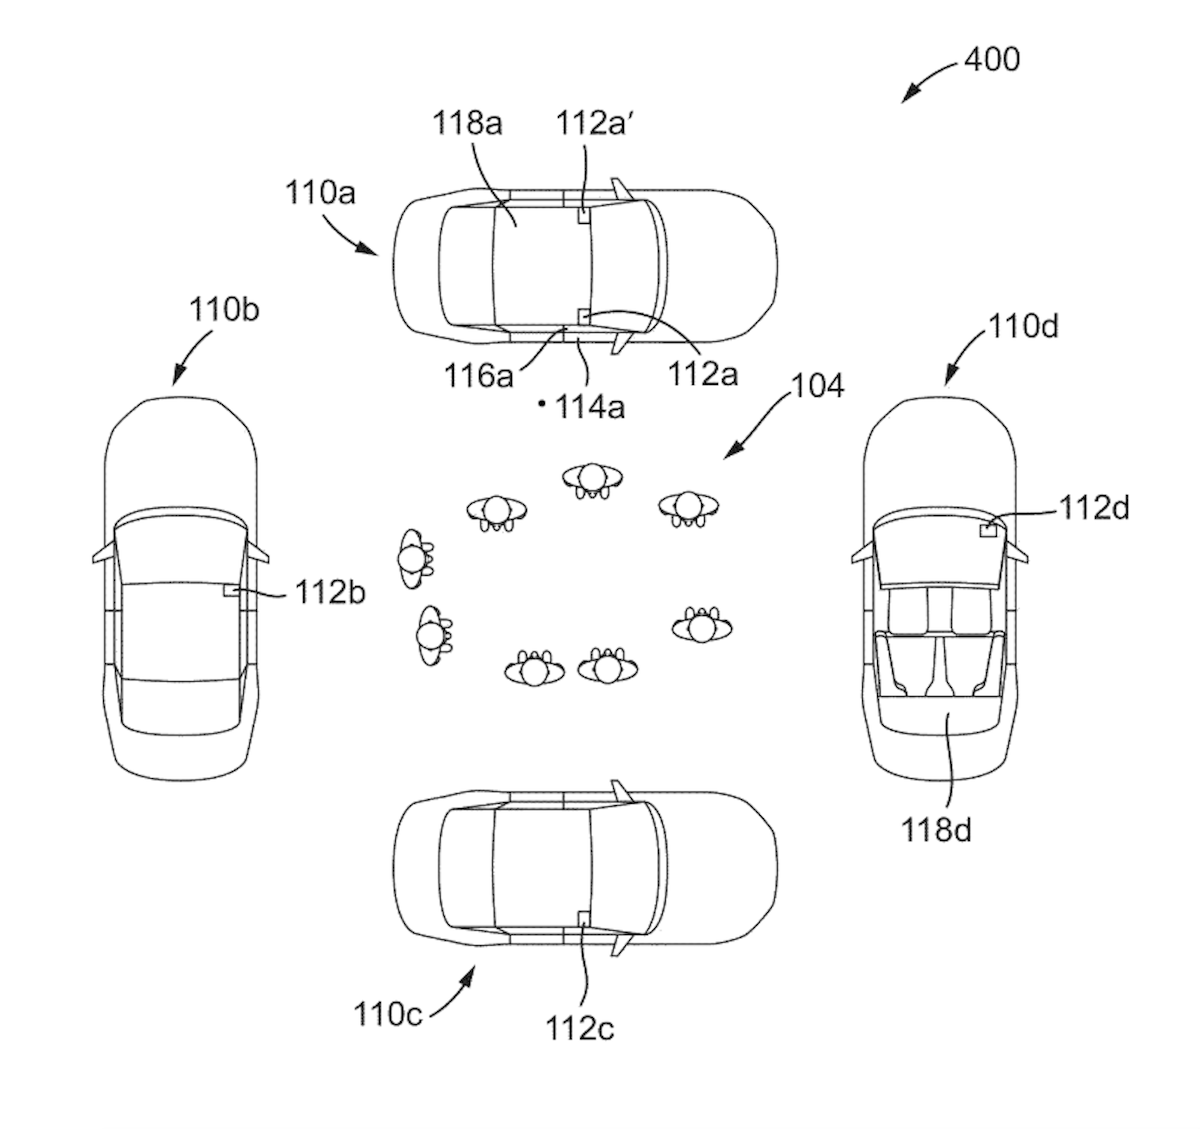 The patent diagram for Ford's new Multi-Vehicle Audio System shows four vehicles parked around a party.